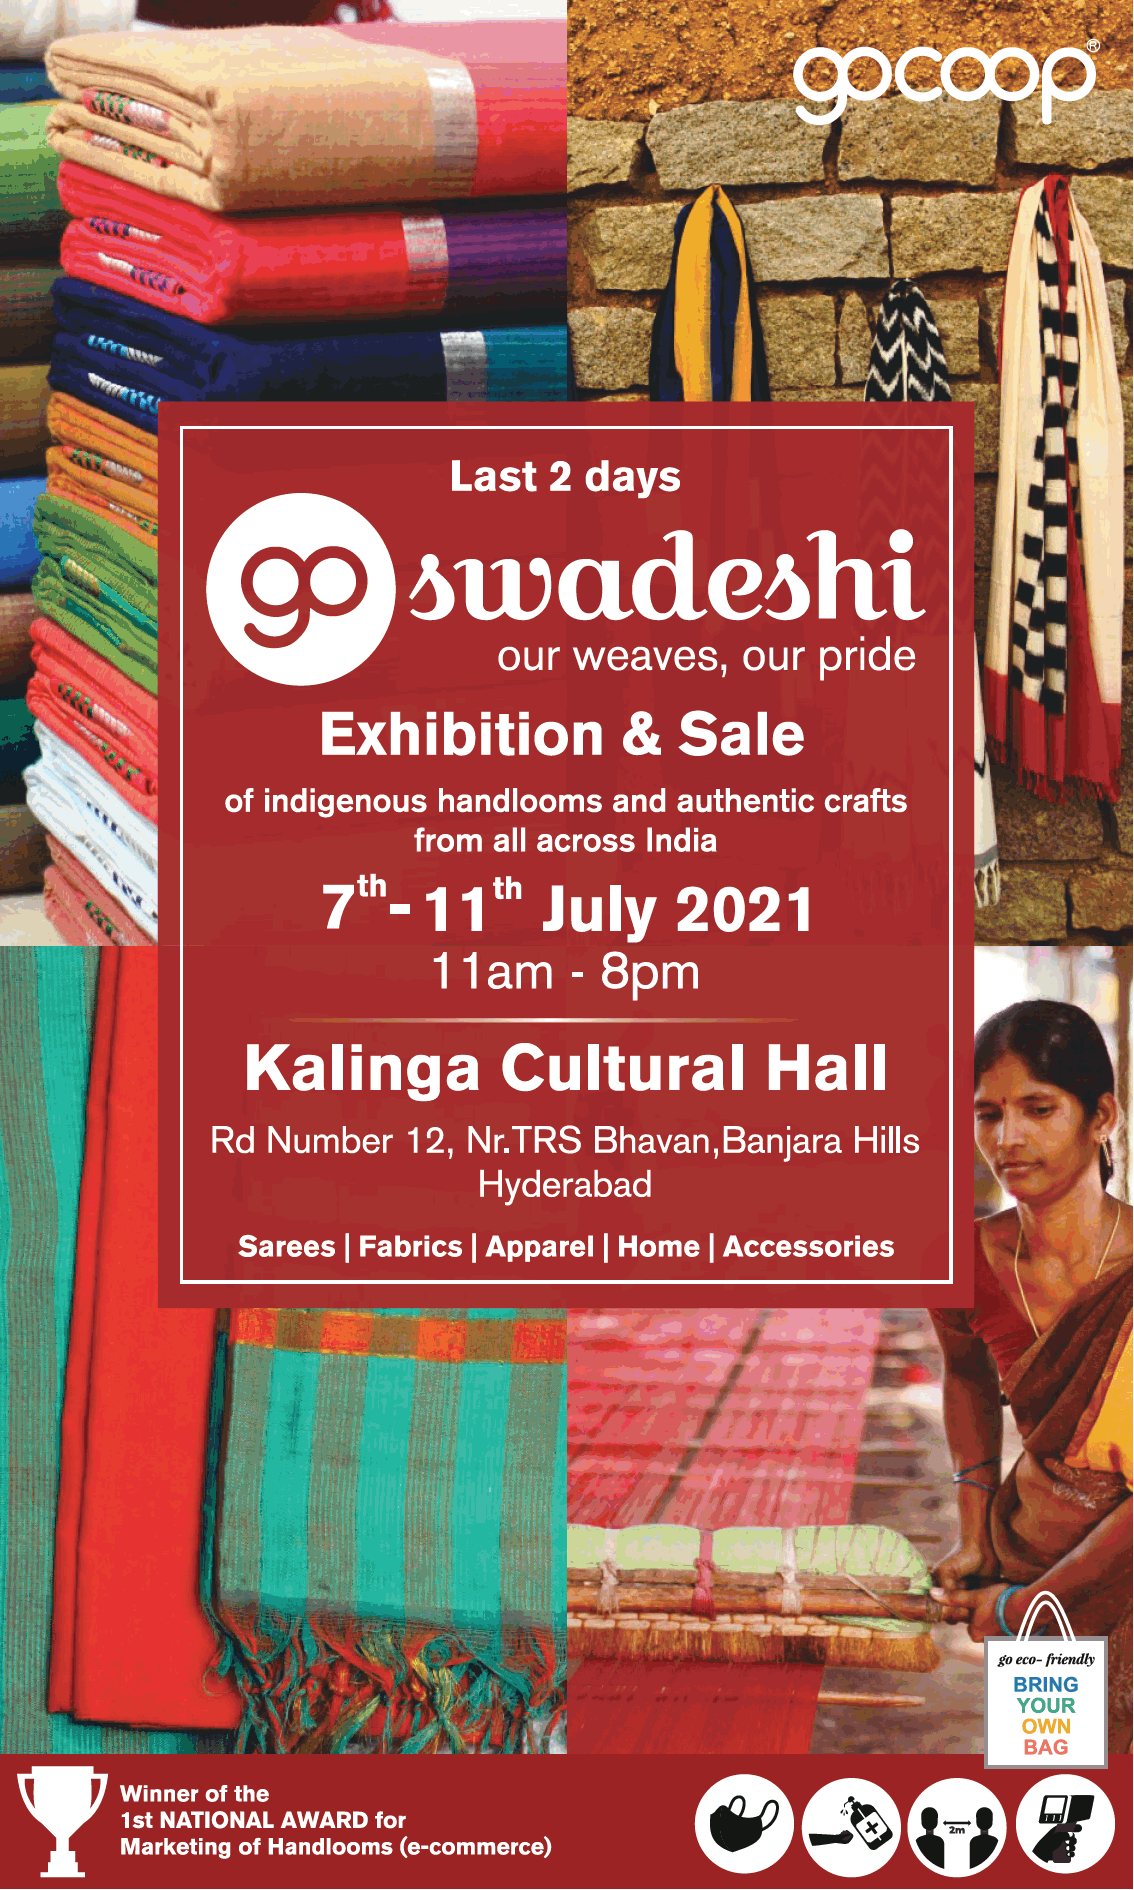 gocoop-swadeshi-exhibition-&-sale-7th-to-11th-july-2021-ad-times-of-india-hyderabad-10-7-2021